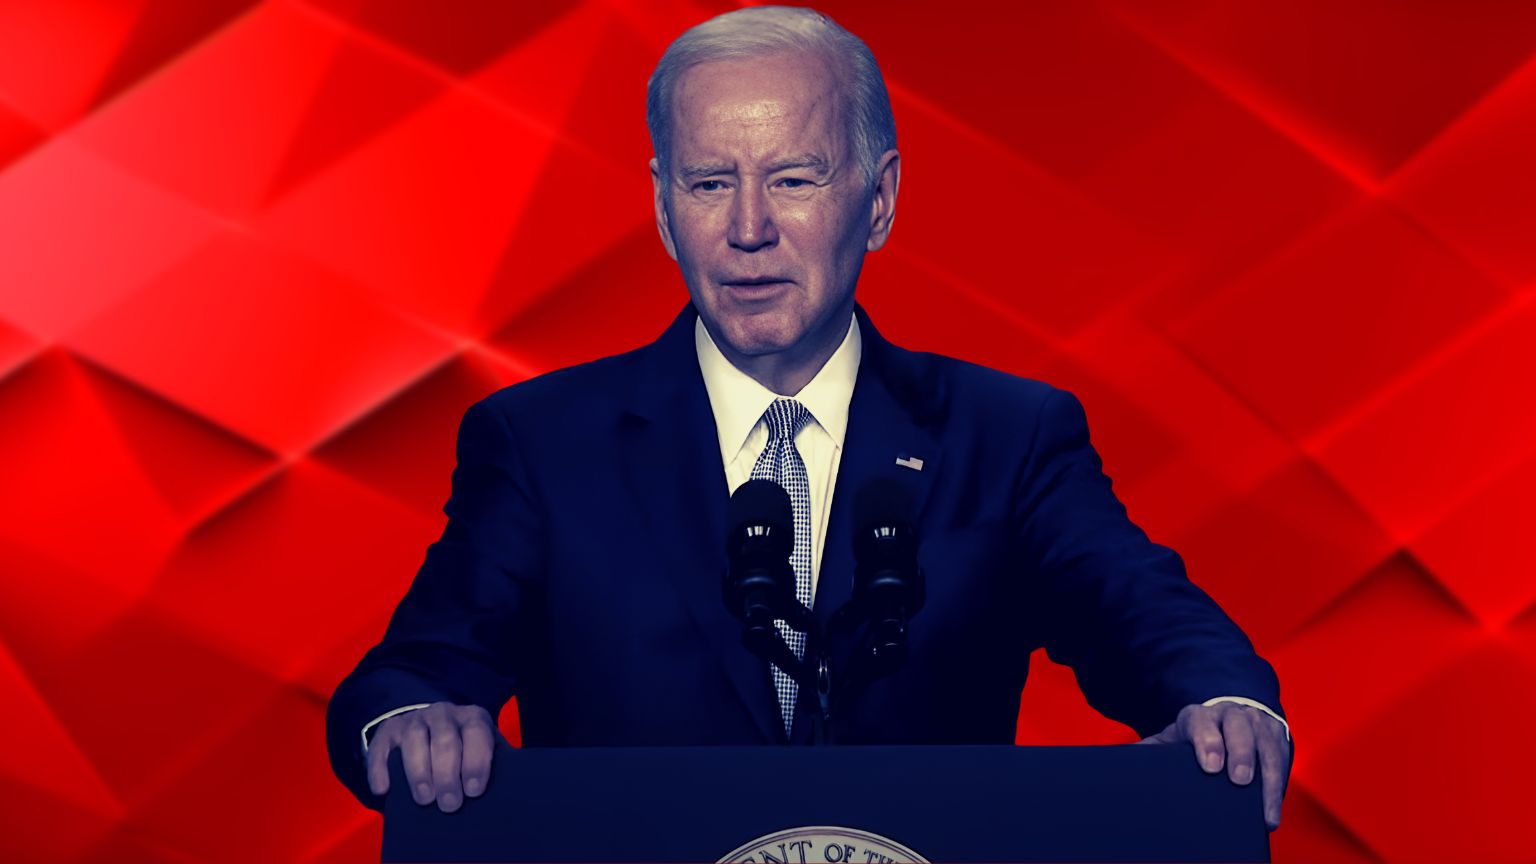 Biden Campaign Says YouTube Easing Up On Censorship Policy Is “Reckless”